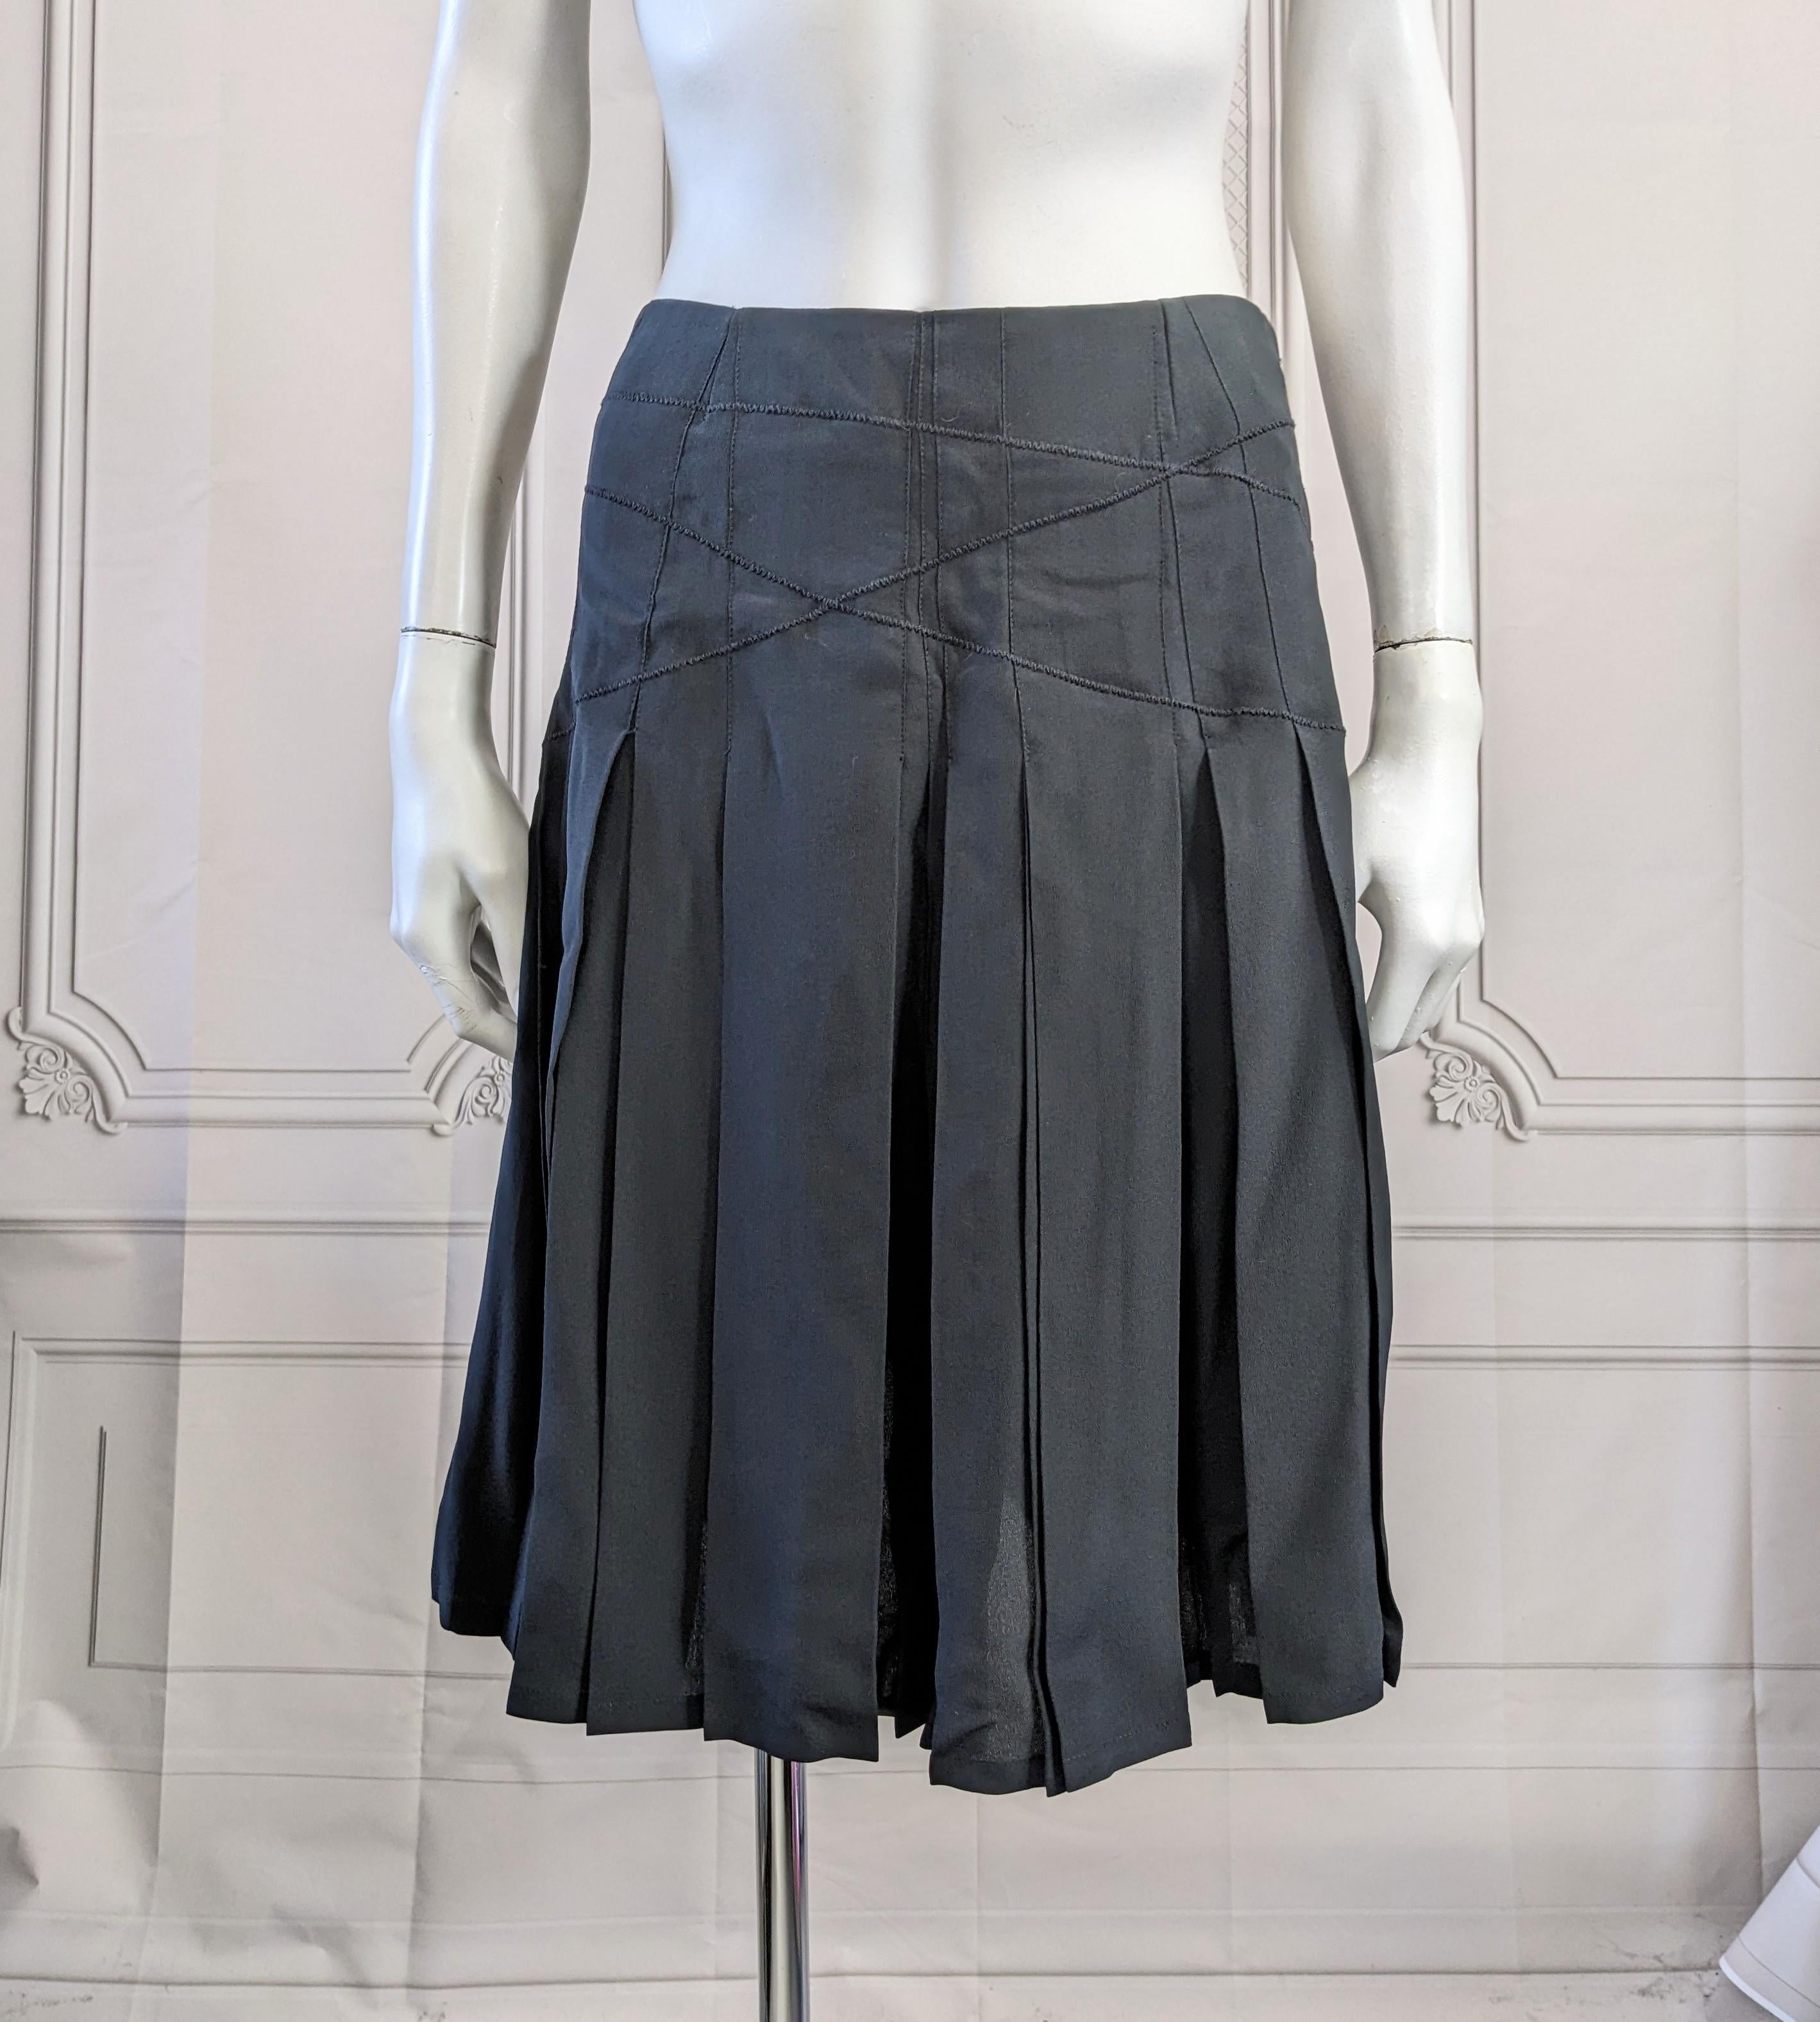 Unusual Asprey, London Black Silk Crepe Pleated Skirt. Box pleated with a series of angled pleats underneath allow for hidden fullness. The pleats are held down by random zig zag stitching across the hip area. Side zip entry. Size 4. Asprey London.  